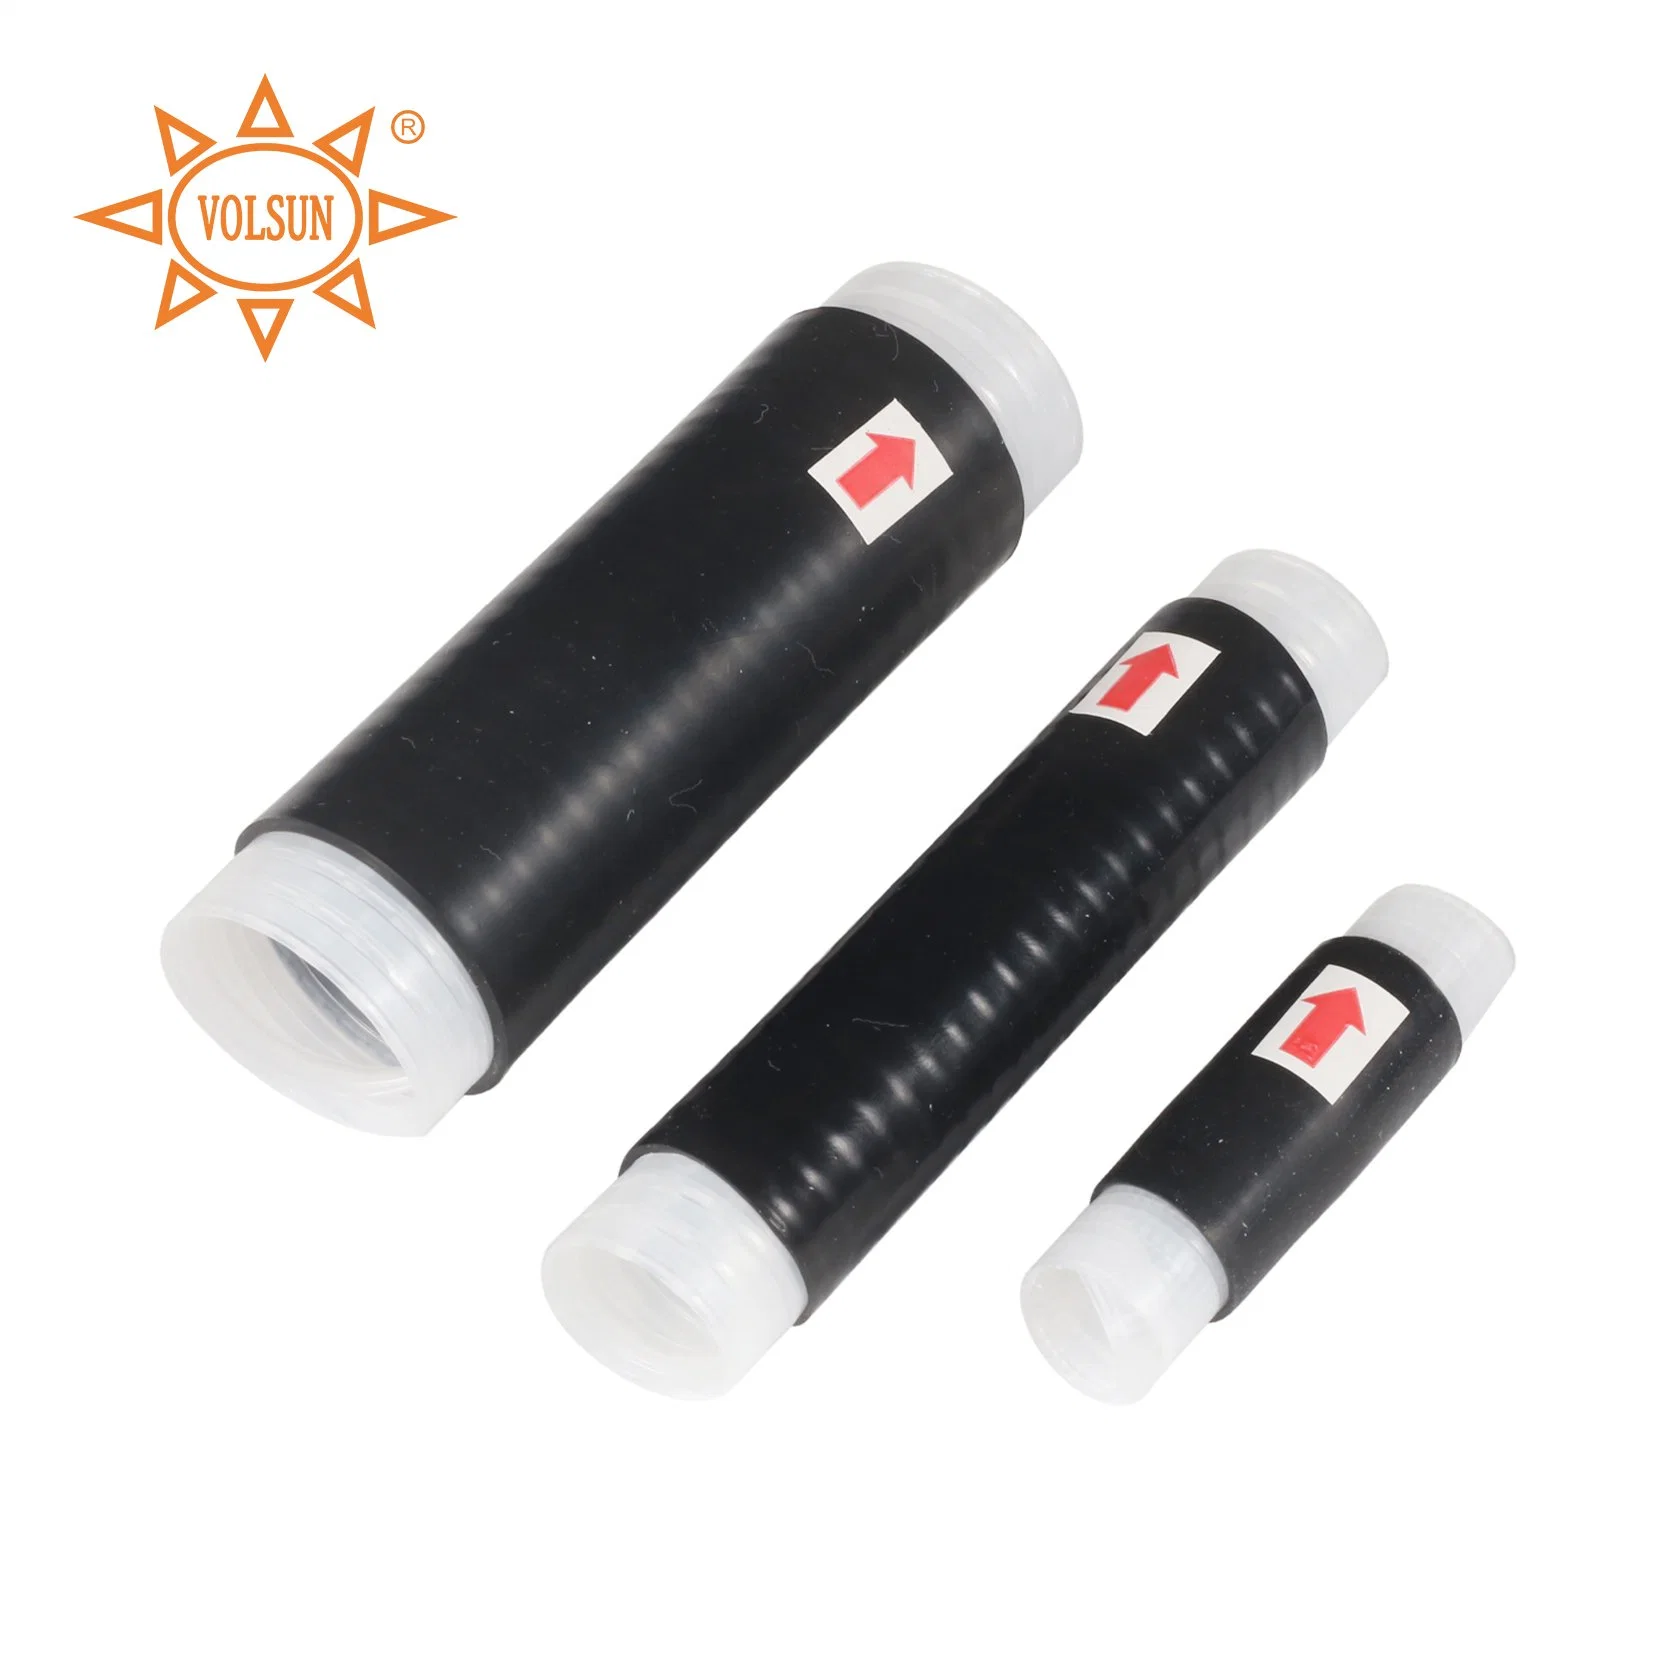 UV Resistant IP68 Waterproof Silicone Rubber Cold Shrink Sealing Tube for Cables RF Connector Insulation Protection